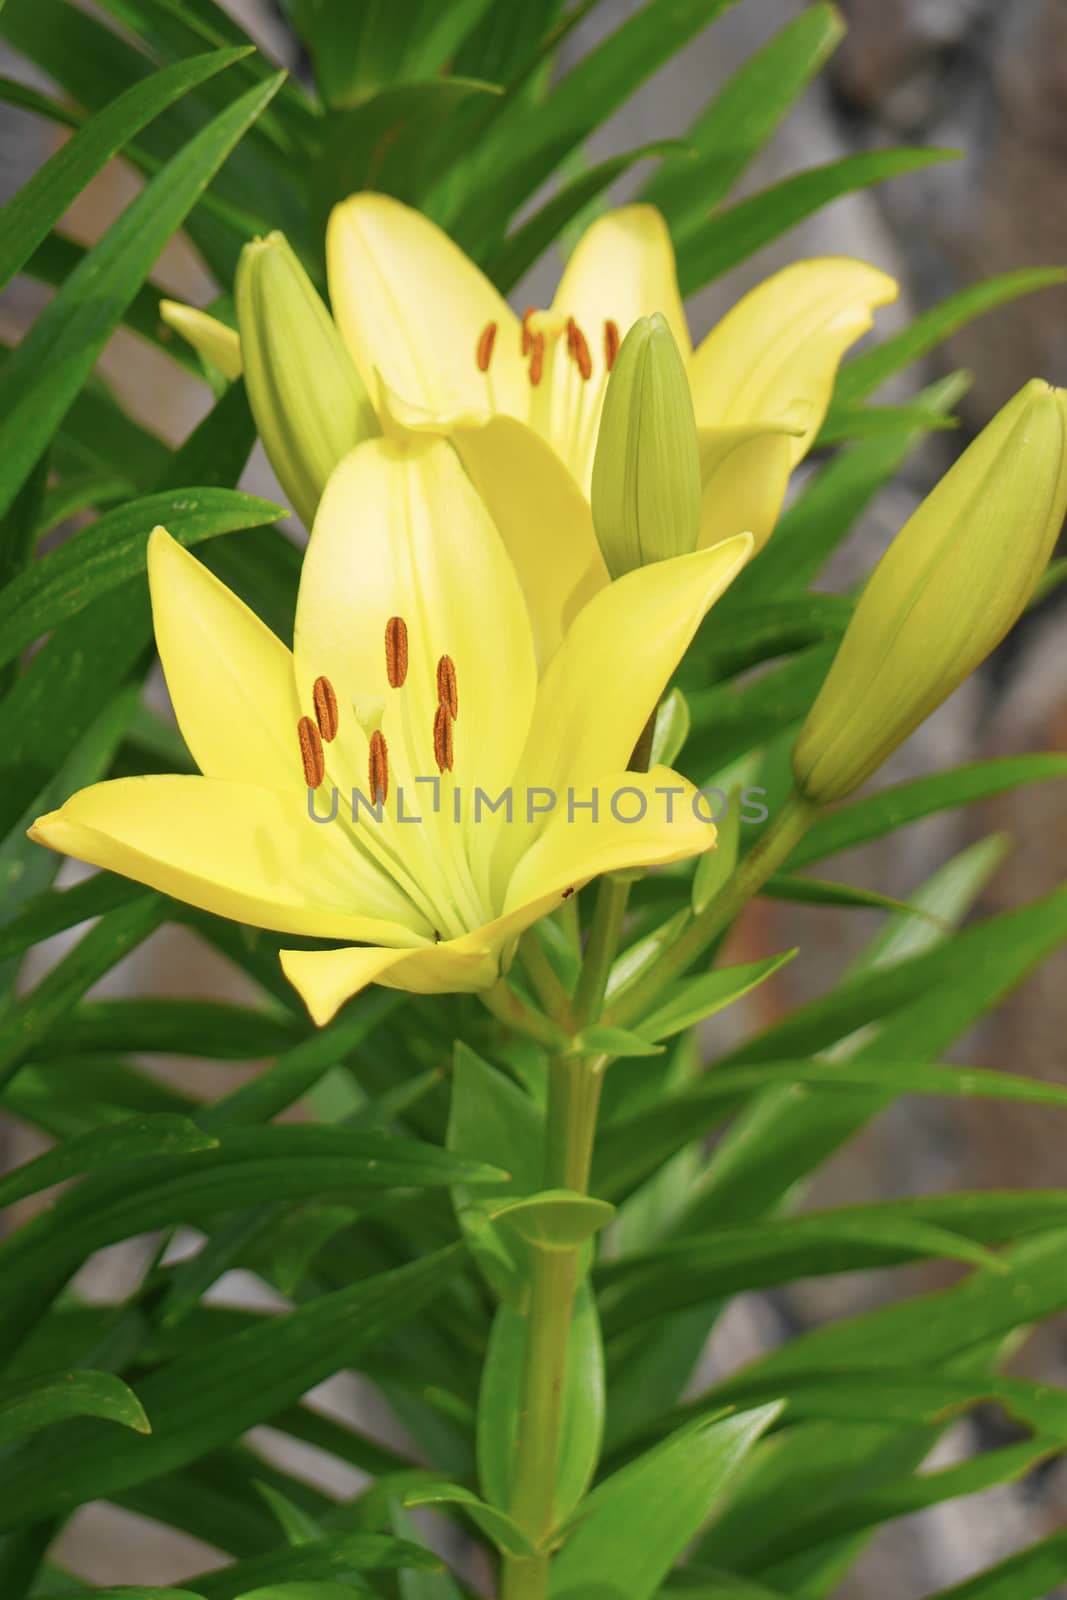 A bush of yellow lilies with beautiful, bright flowers on a green stalk with juicy leaves by Adamchuk